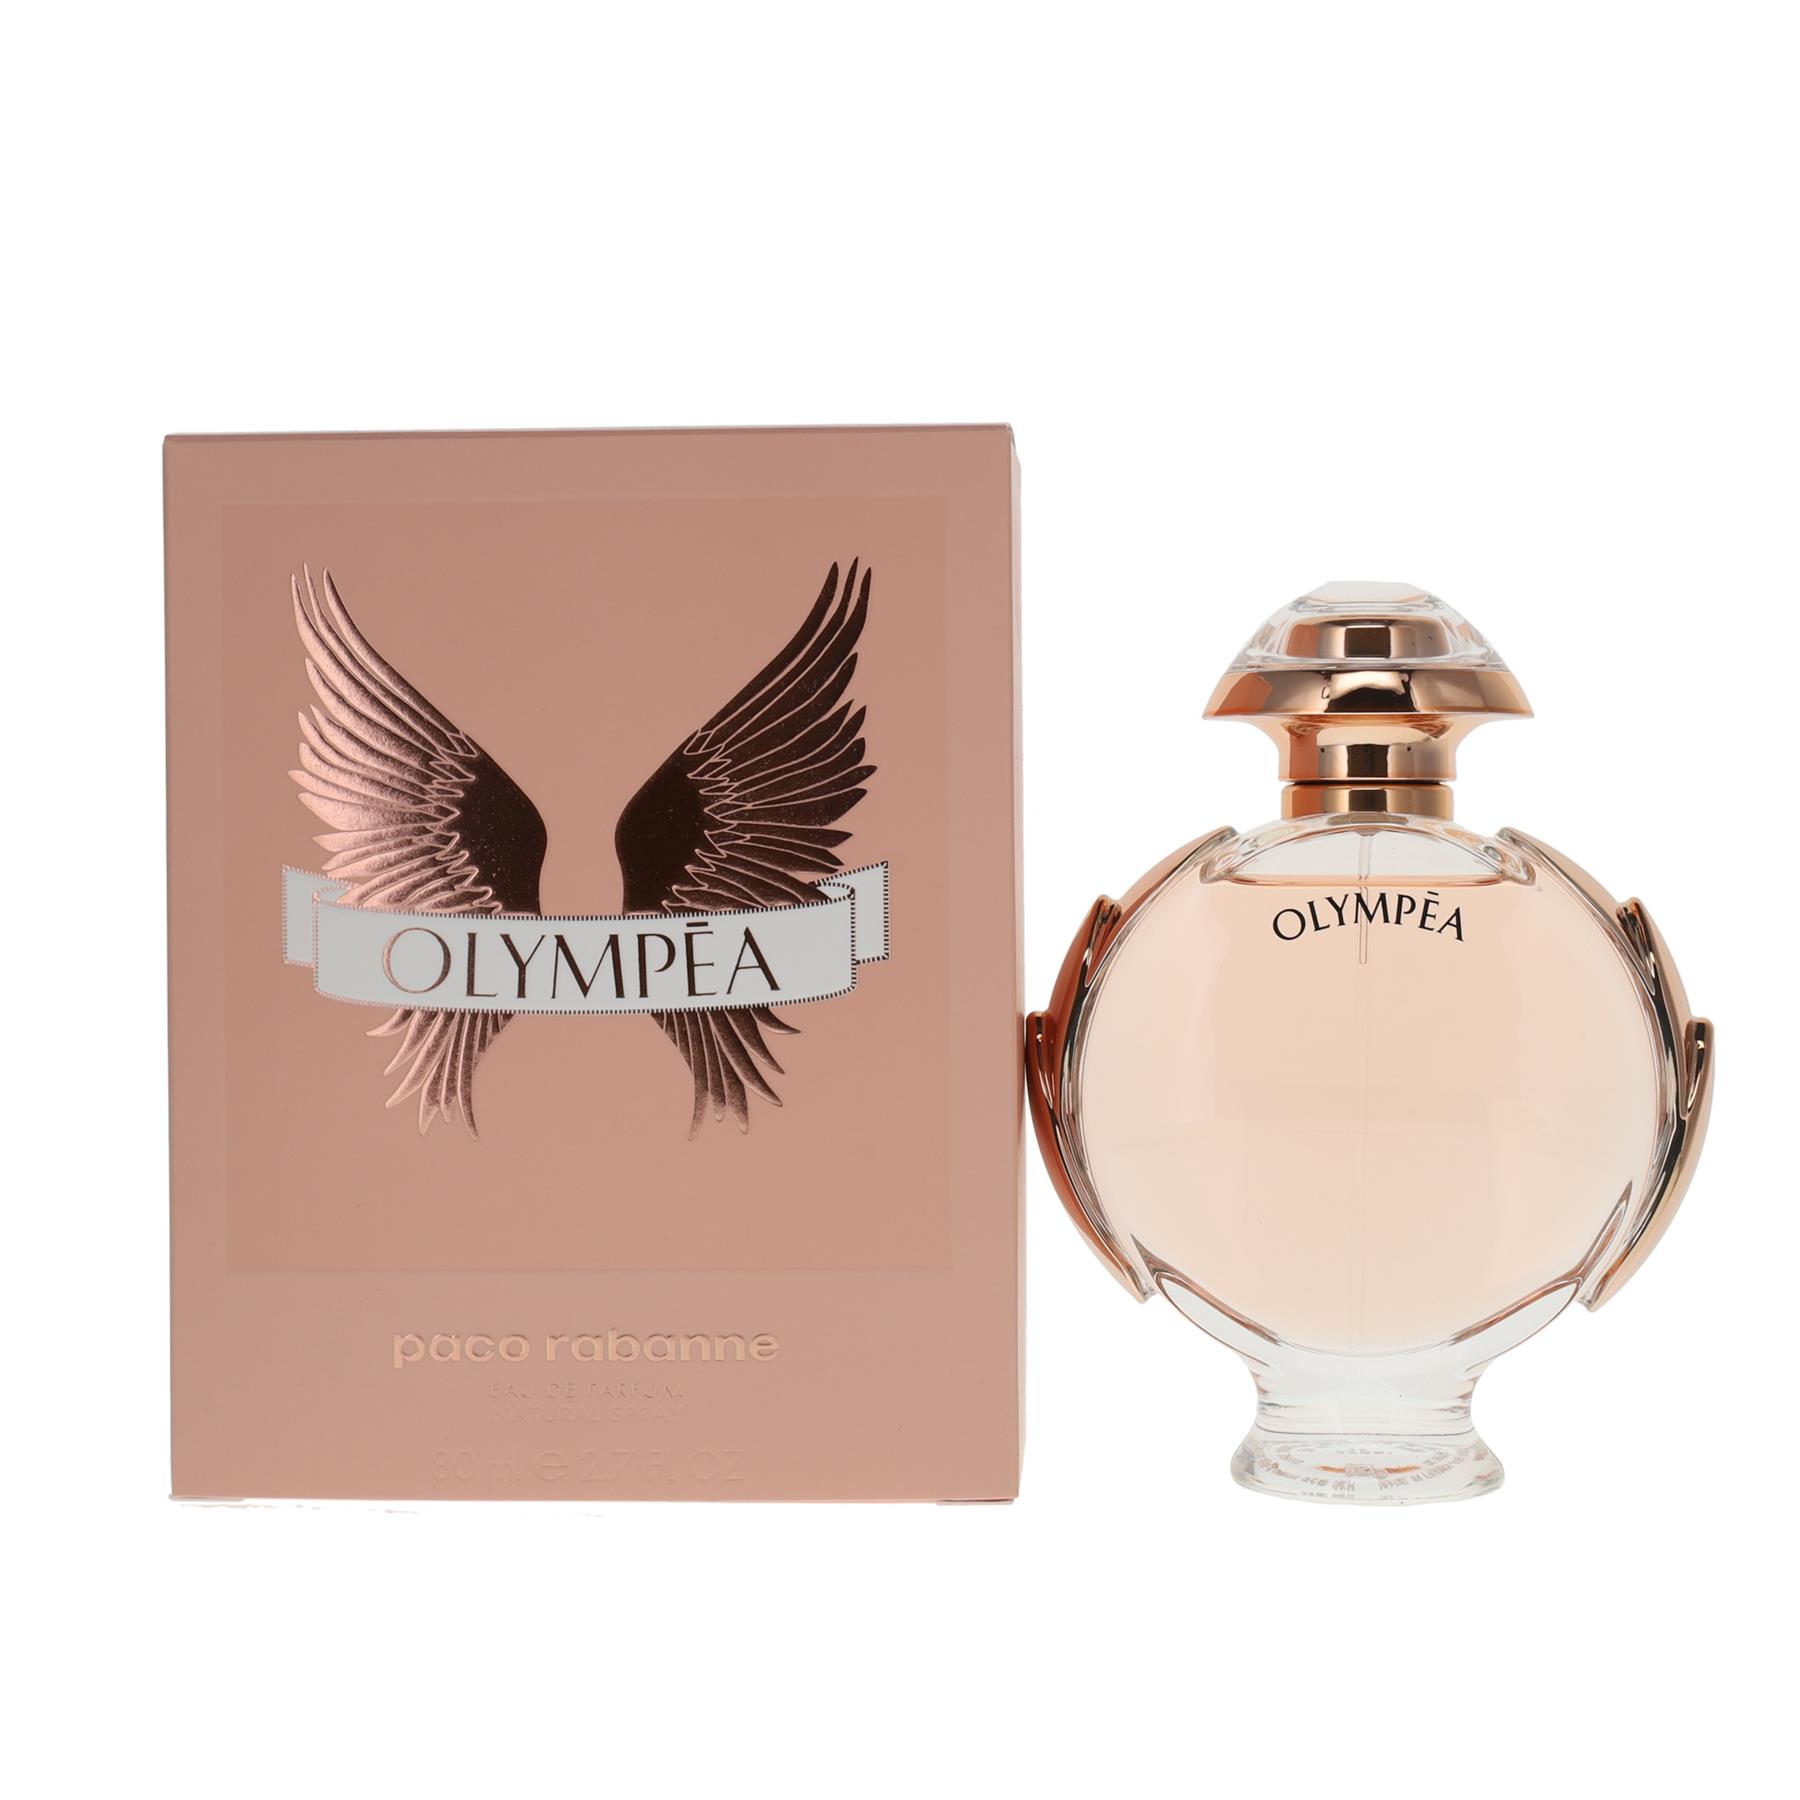 Paco Rabanne Olympea 80ml Eau de Parfum Spray for Her from Perfume Plus Direct